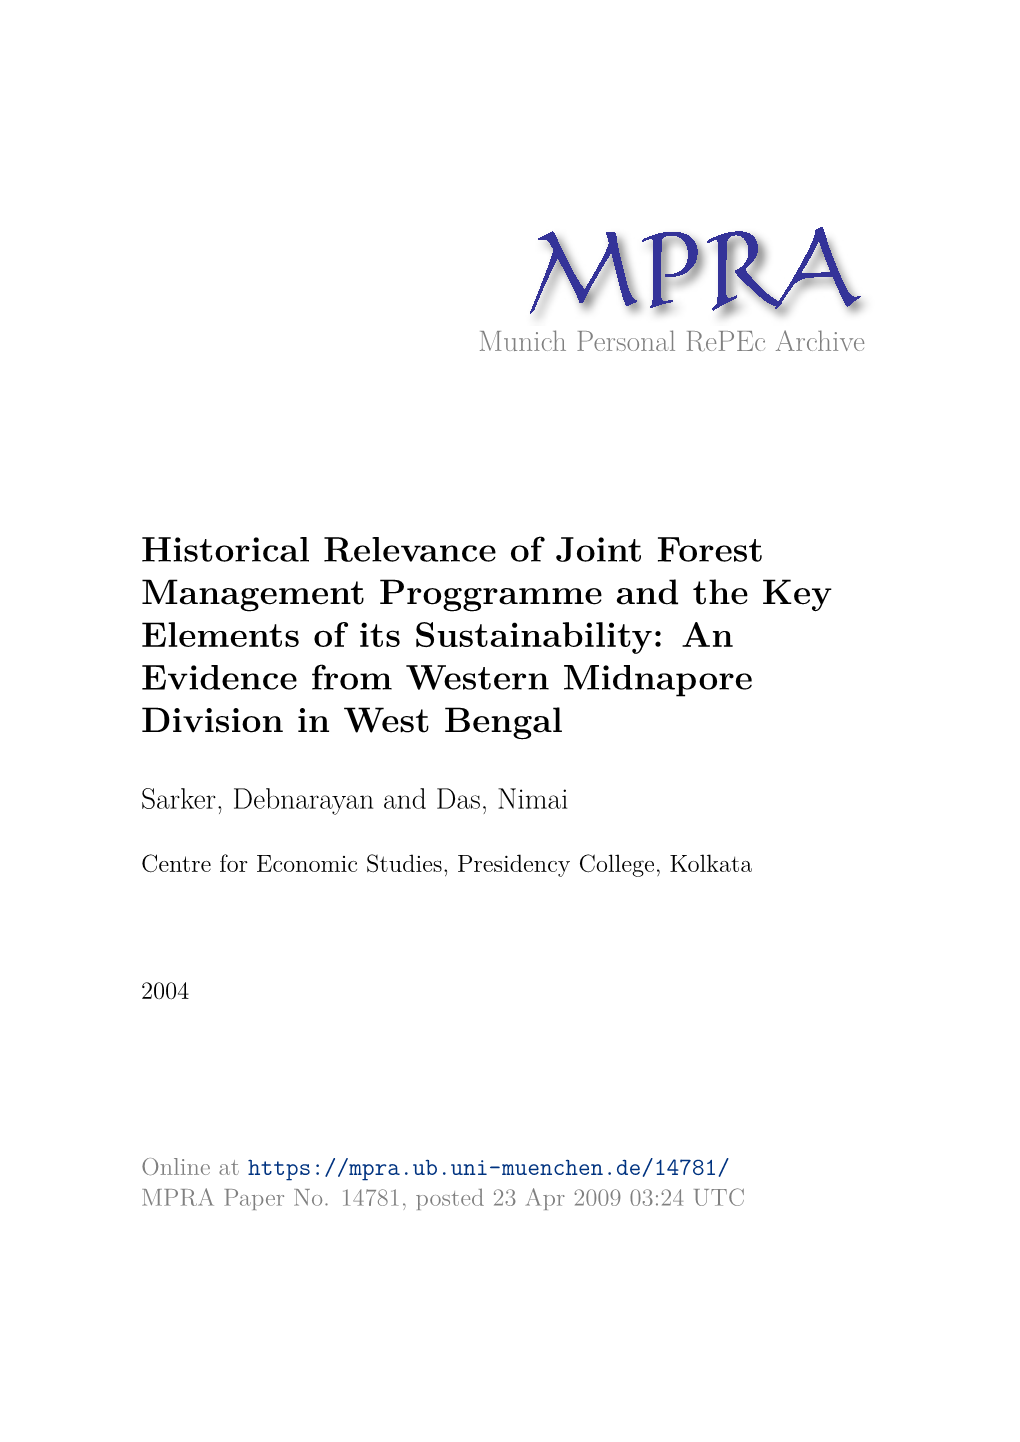 Historical Relevance of Joint Forest Management Proggramme and the Key Elements of Its Sustainability: an Evidence from Western Midnapore Division in West Bengal